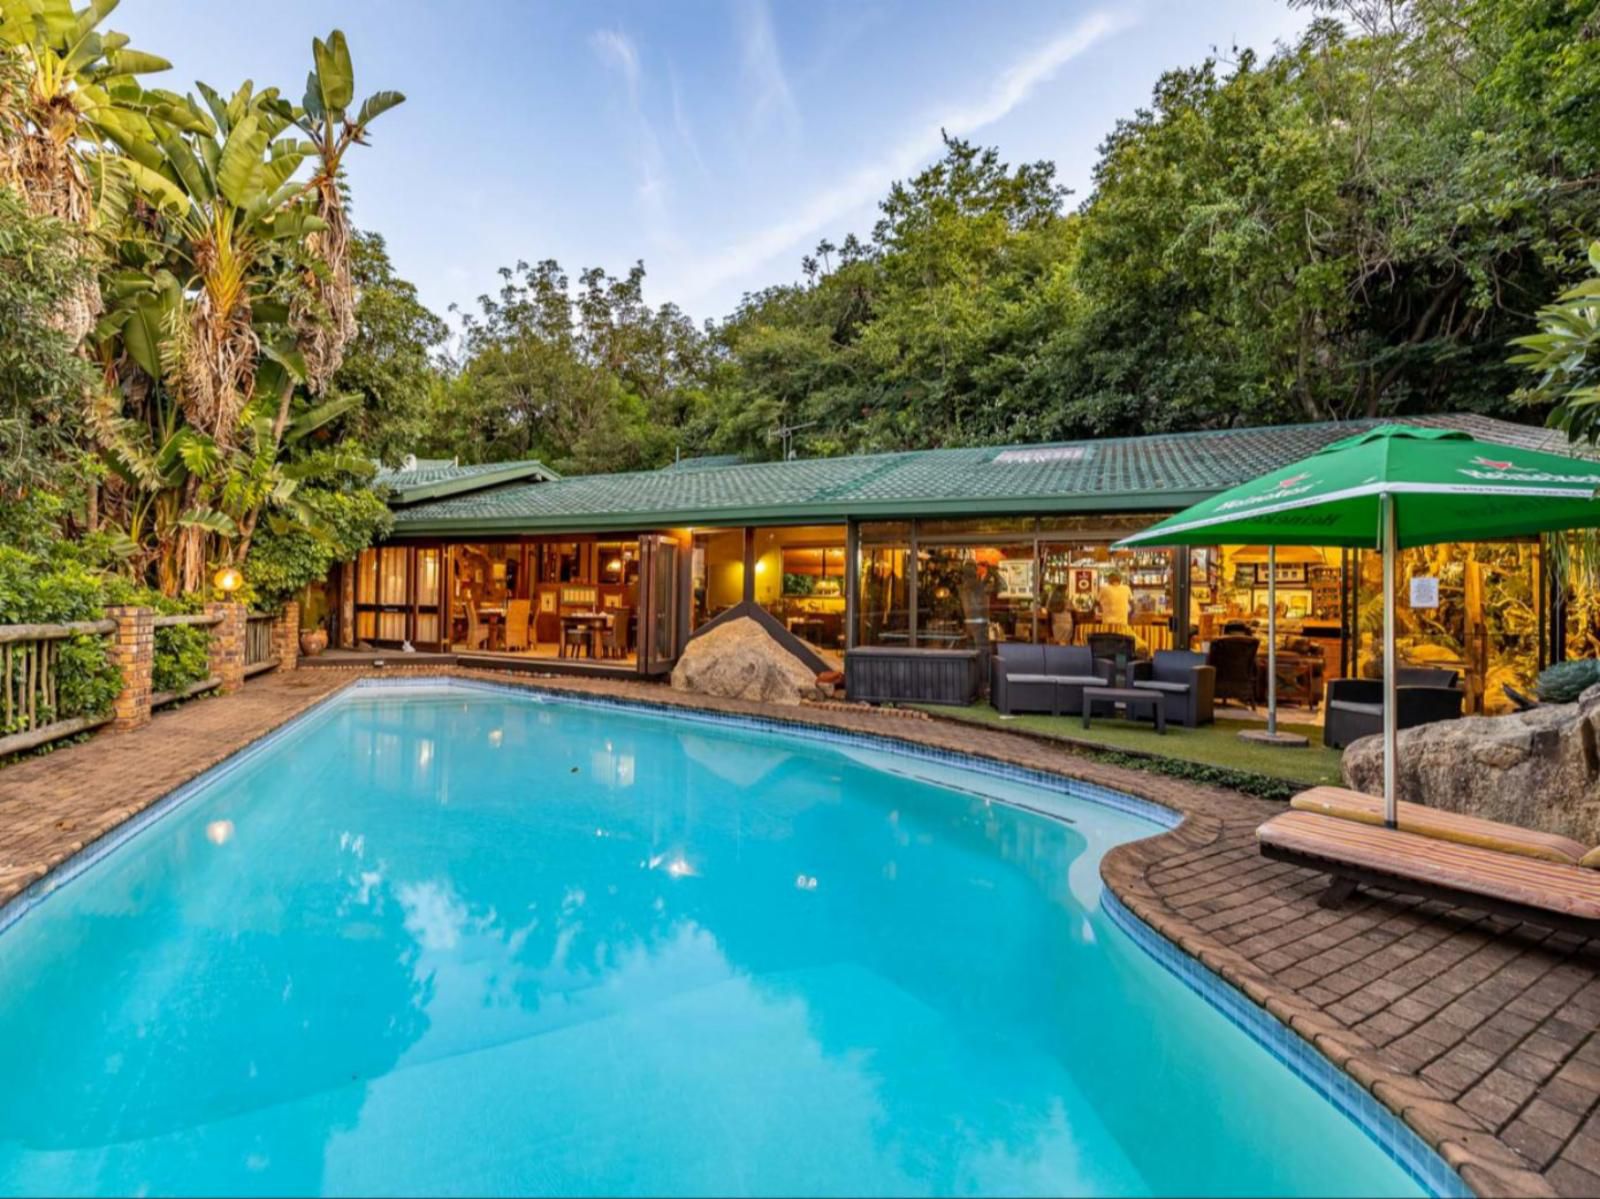 Jorn S Guest House Nelspruit Mpumalanga South Africa Complementary Colors, House, Building, Architecture, Swimming Pool